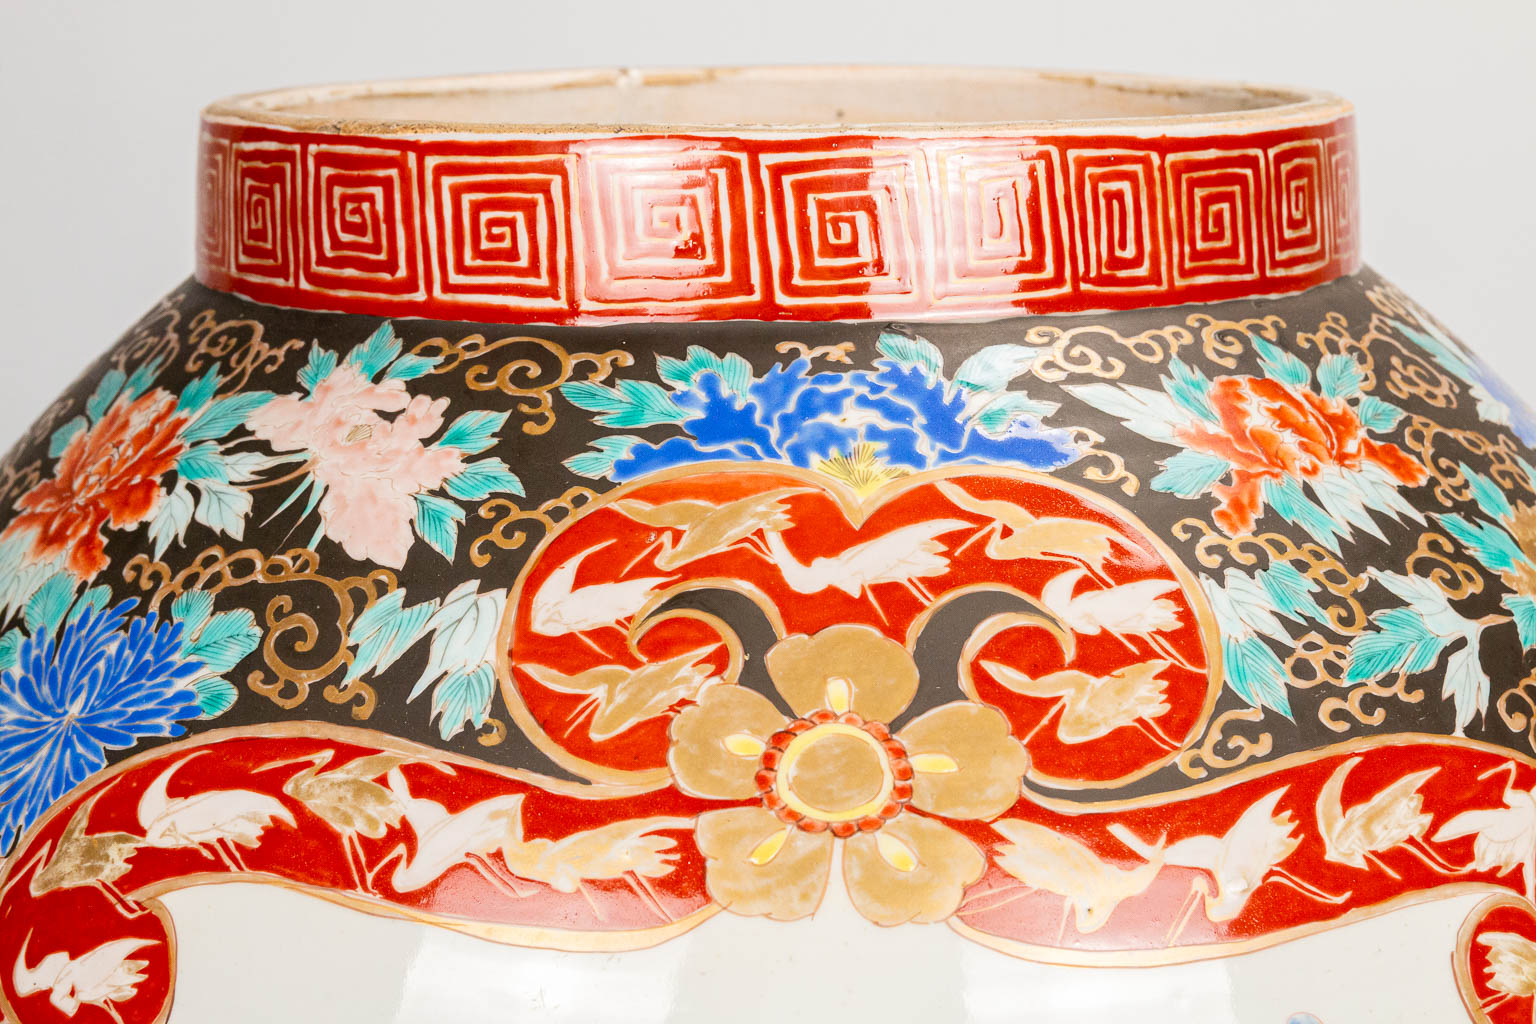 A large Imari display vase made of hand-painted porcelain in Japan. 19th/20th century. (60 x 42 cm) - Image 19 of 21